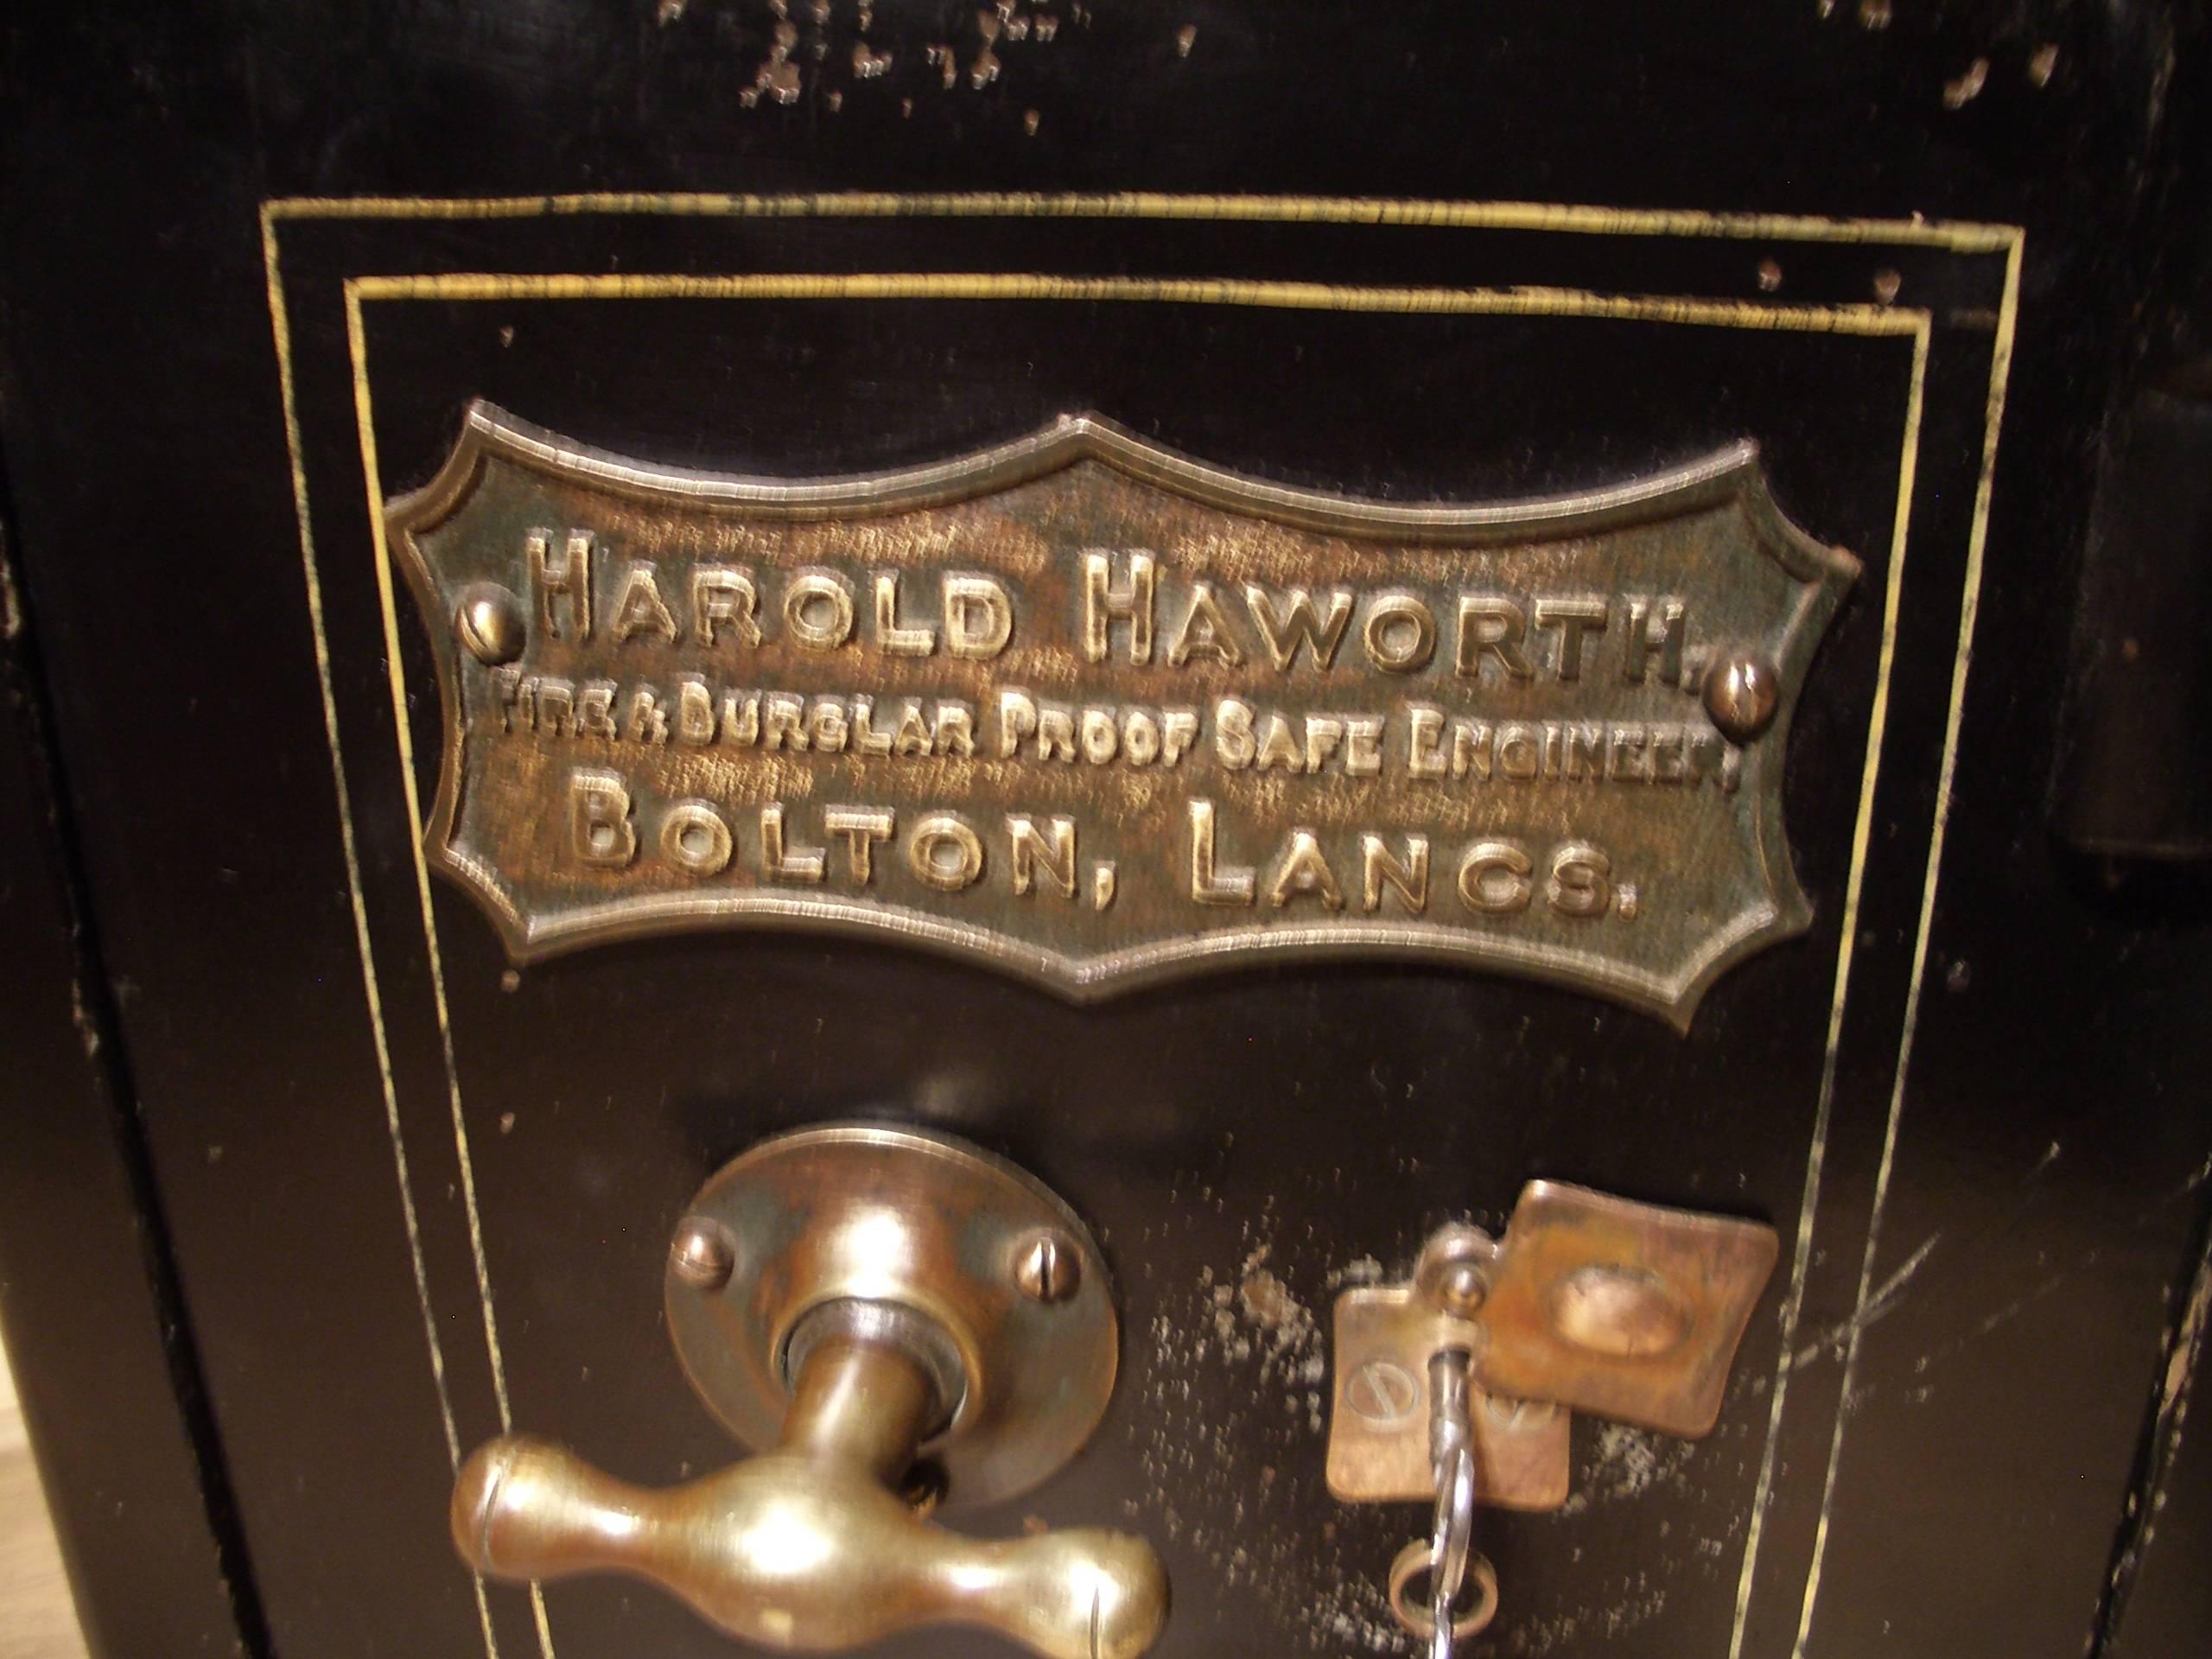 Beautiful little antique safe in completely original condition. Both locks in working condition and with the original keys. Fire and burglar proof. Small size safes are rare, especially in this state
Maker: Harold Haworth
Bolton, Lancashire,